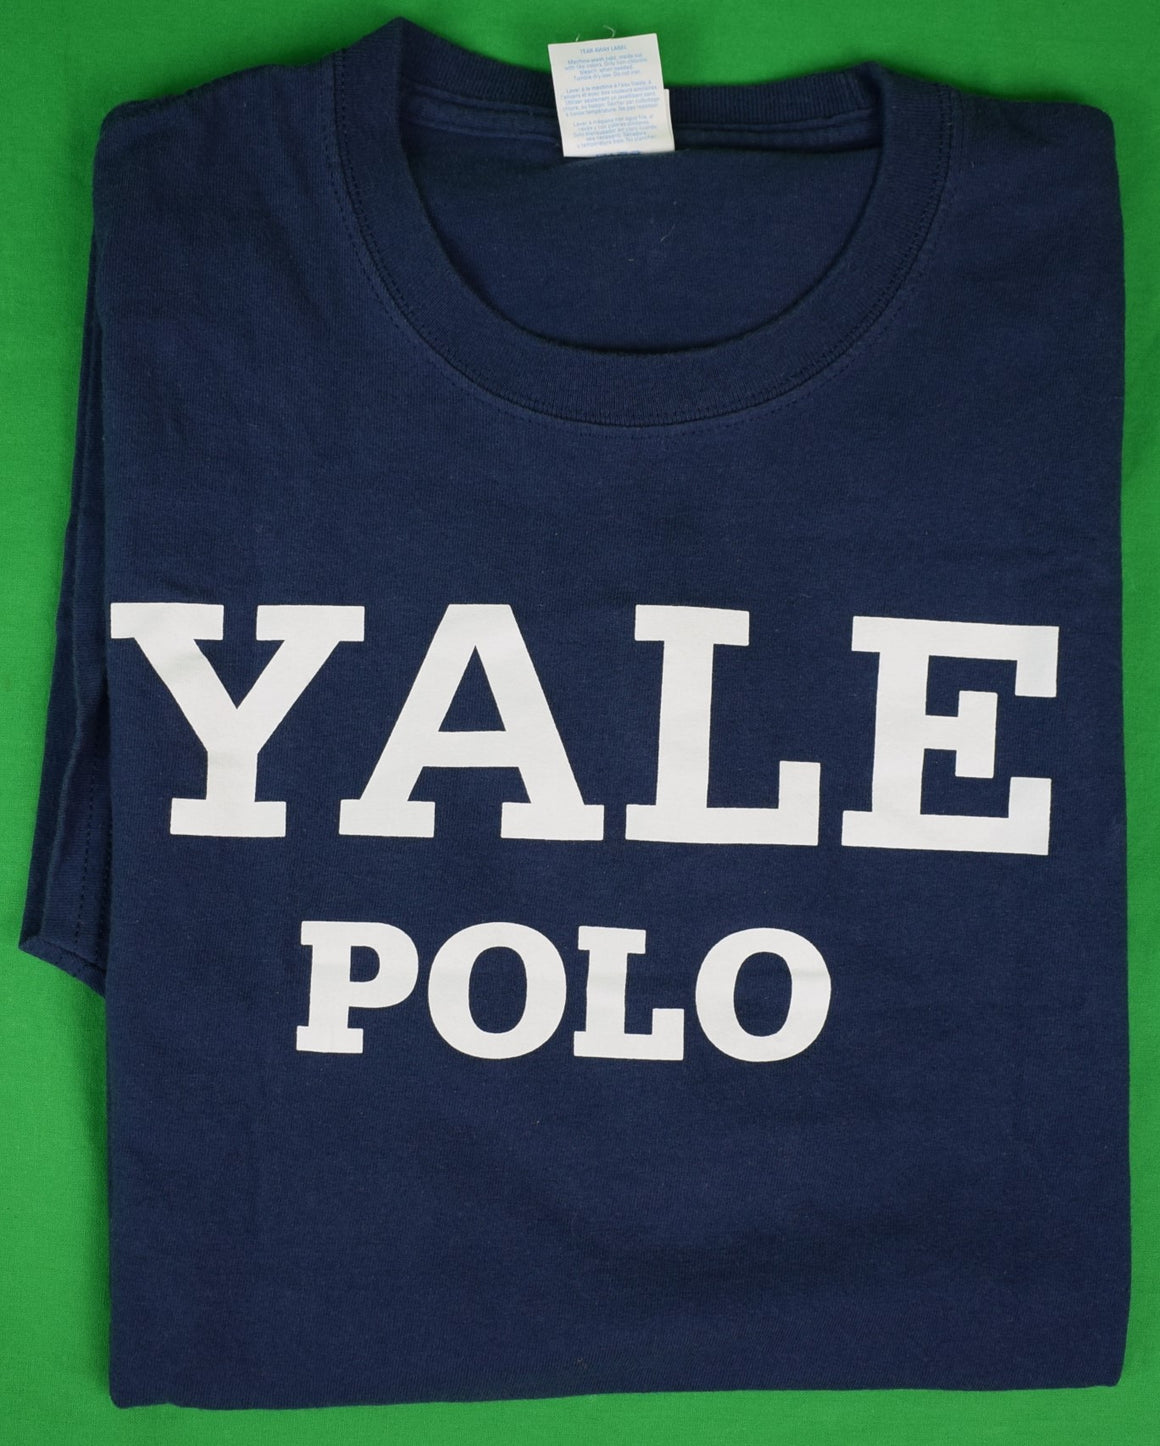 "Yale Polo Navy Cotton T Shirt" Sz XL (DEADSTOCK) (SOLD)